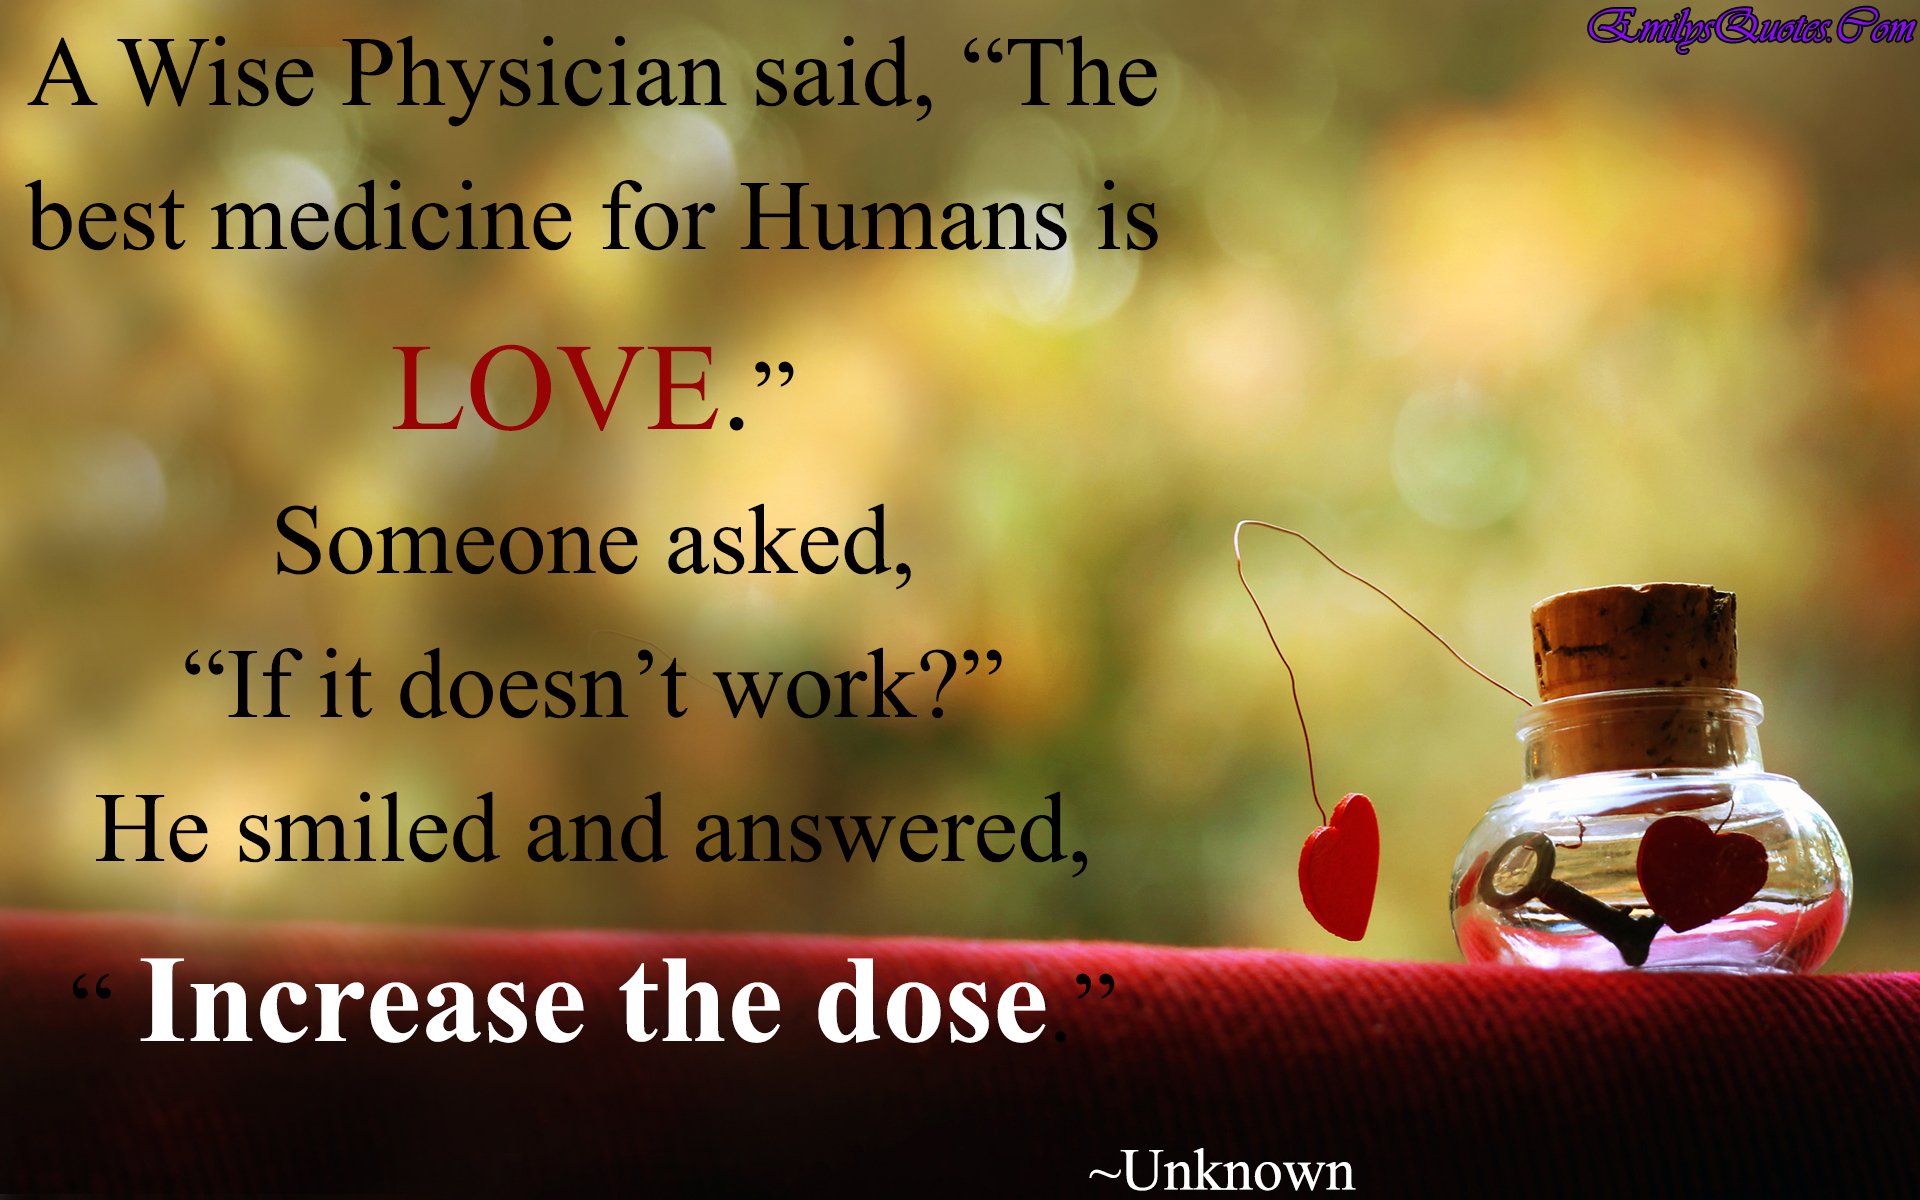 A Wise Physician said, “The best medicine for Humans is LOVE.” Someone asked, “If it doesn’t work?” He smiled and answered, “ Increase the dose.”